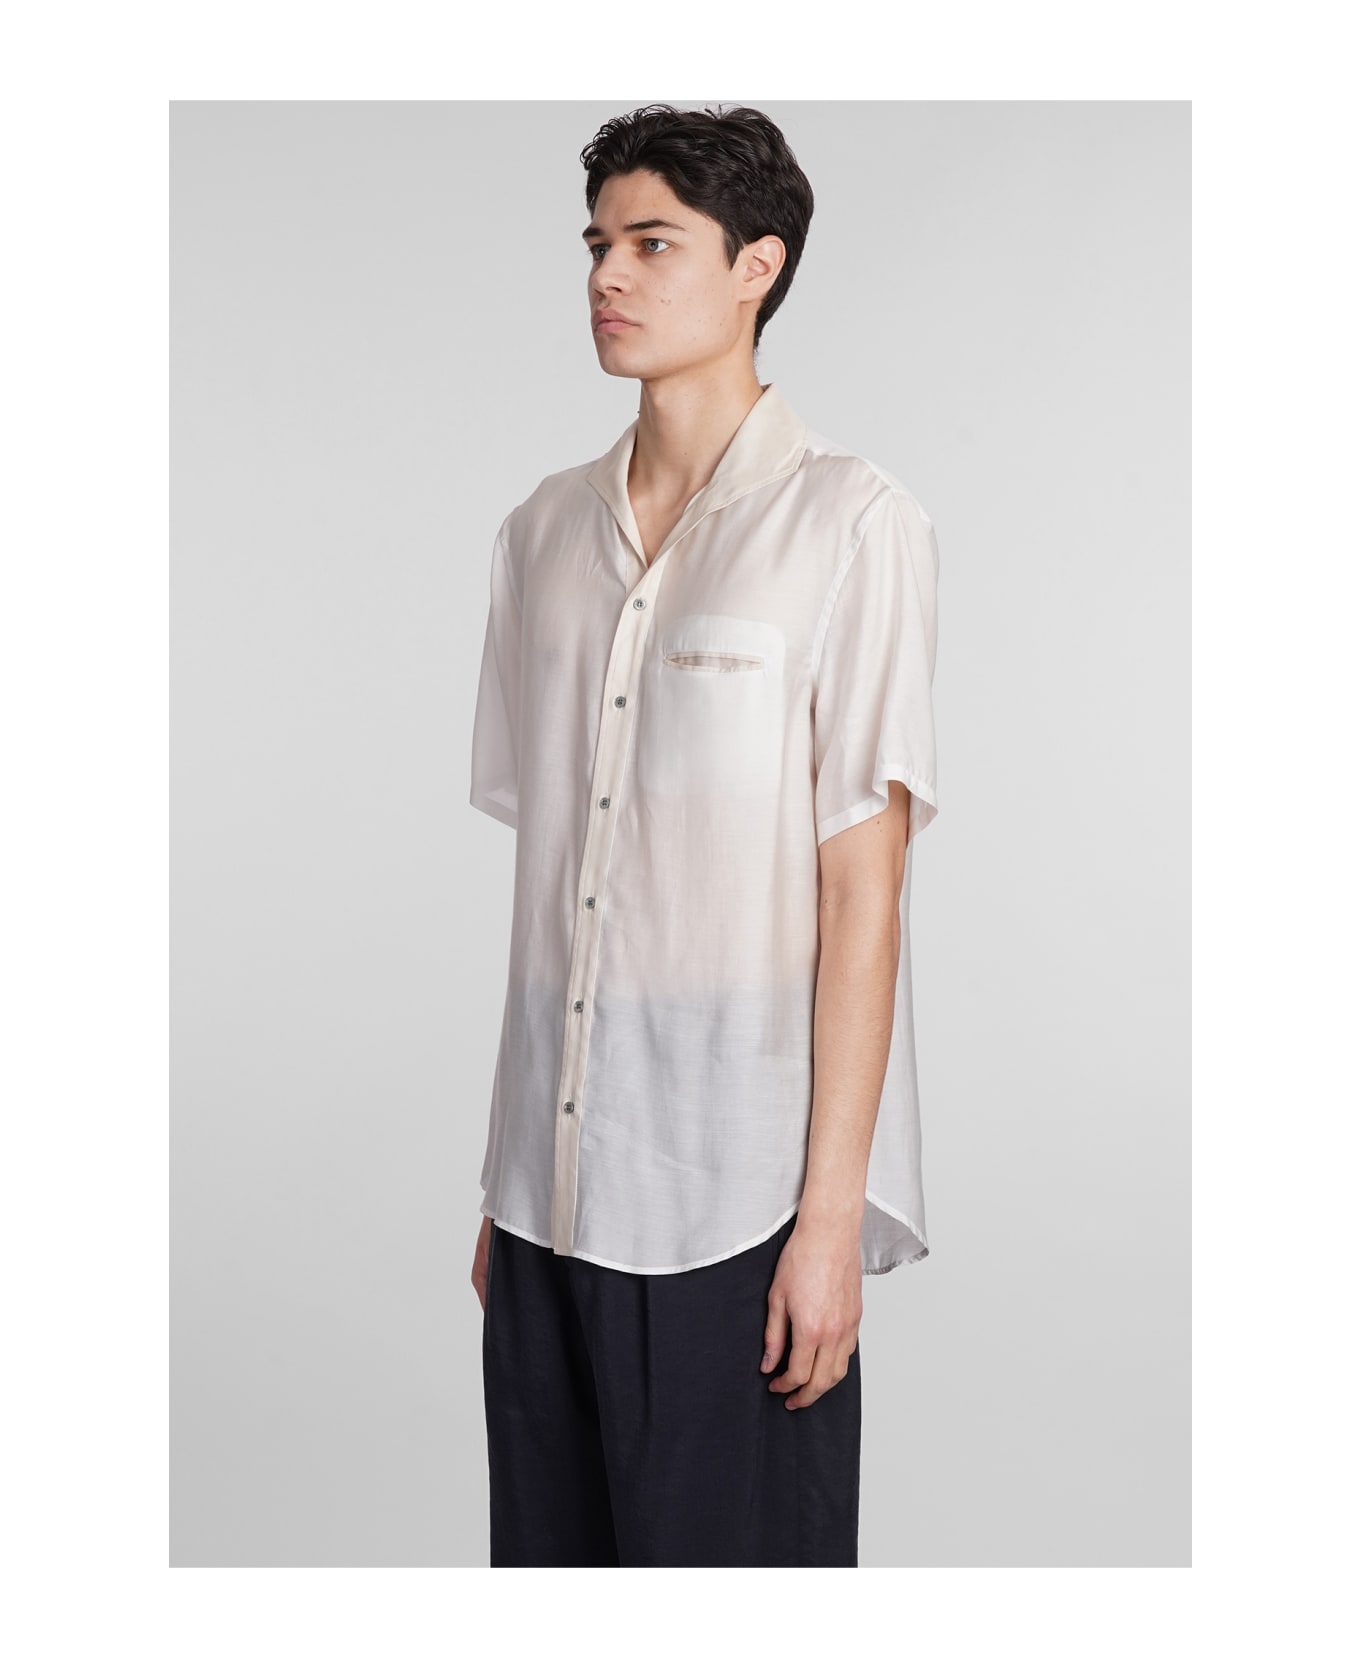 Giorgio Armani Shirt In White Wool And Polyester - white